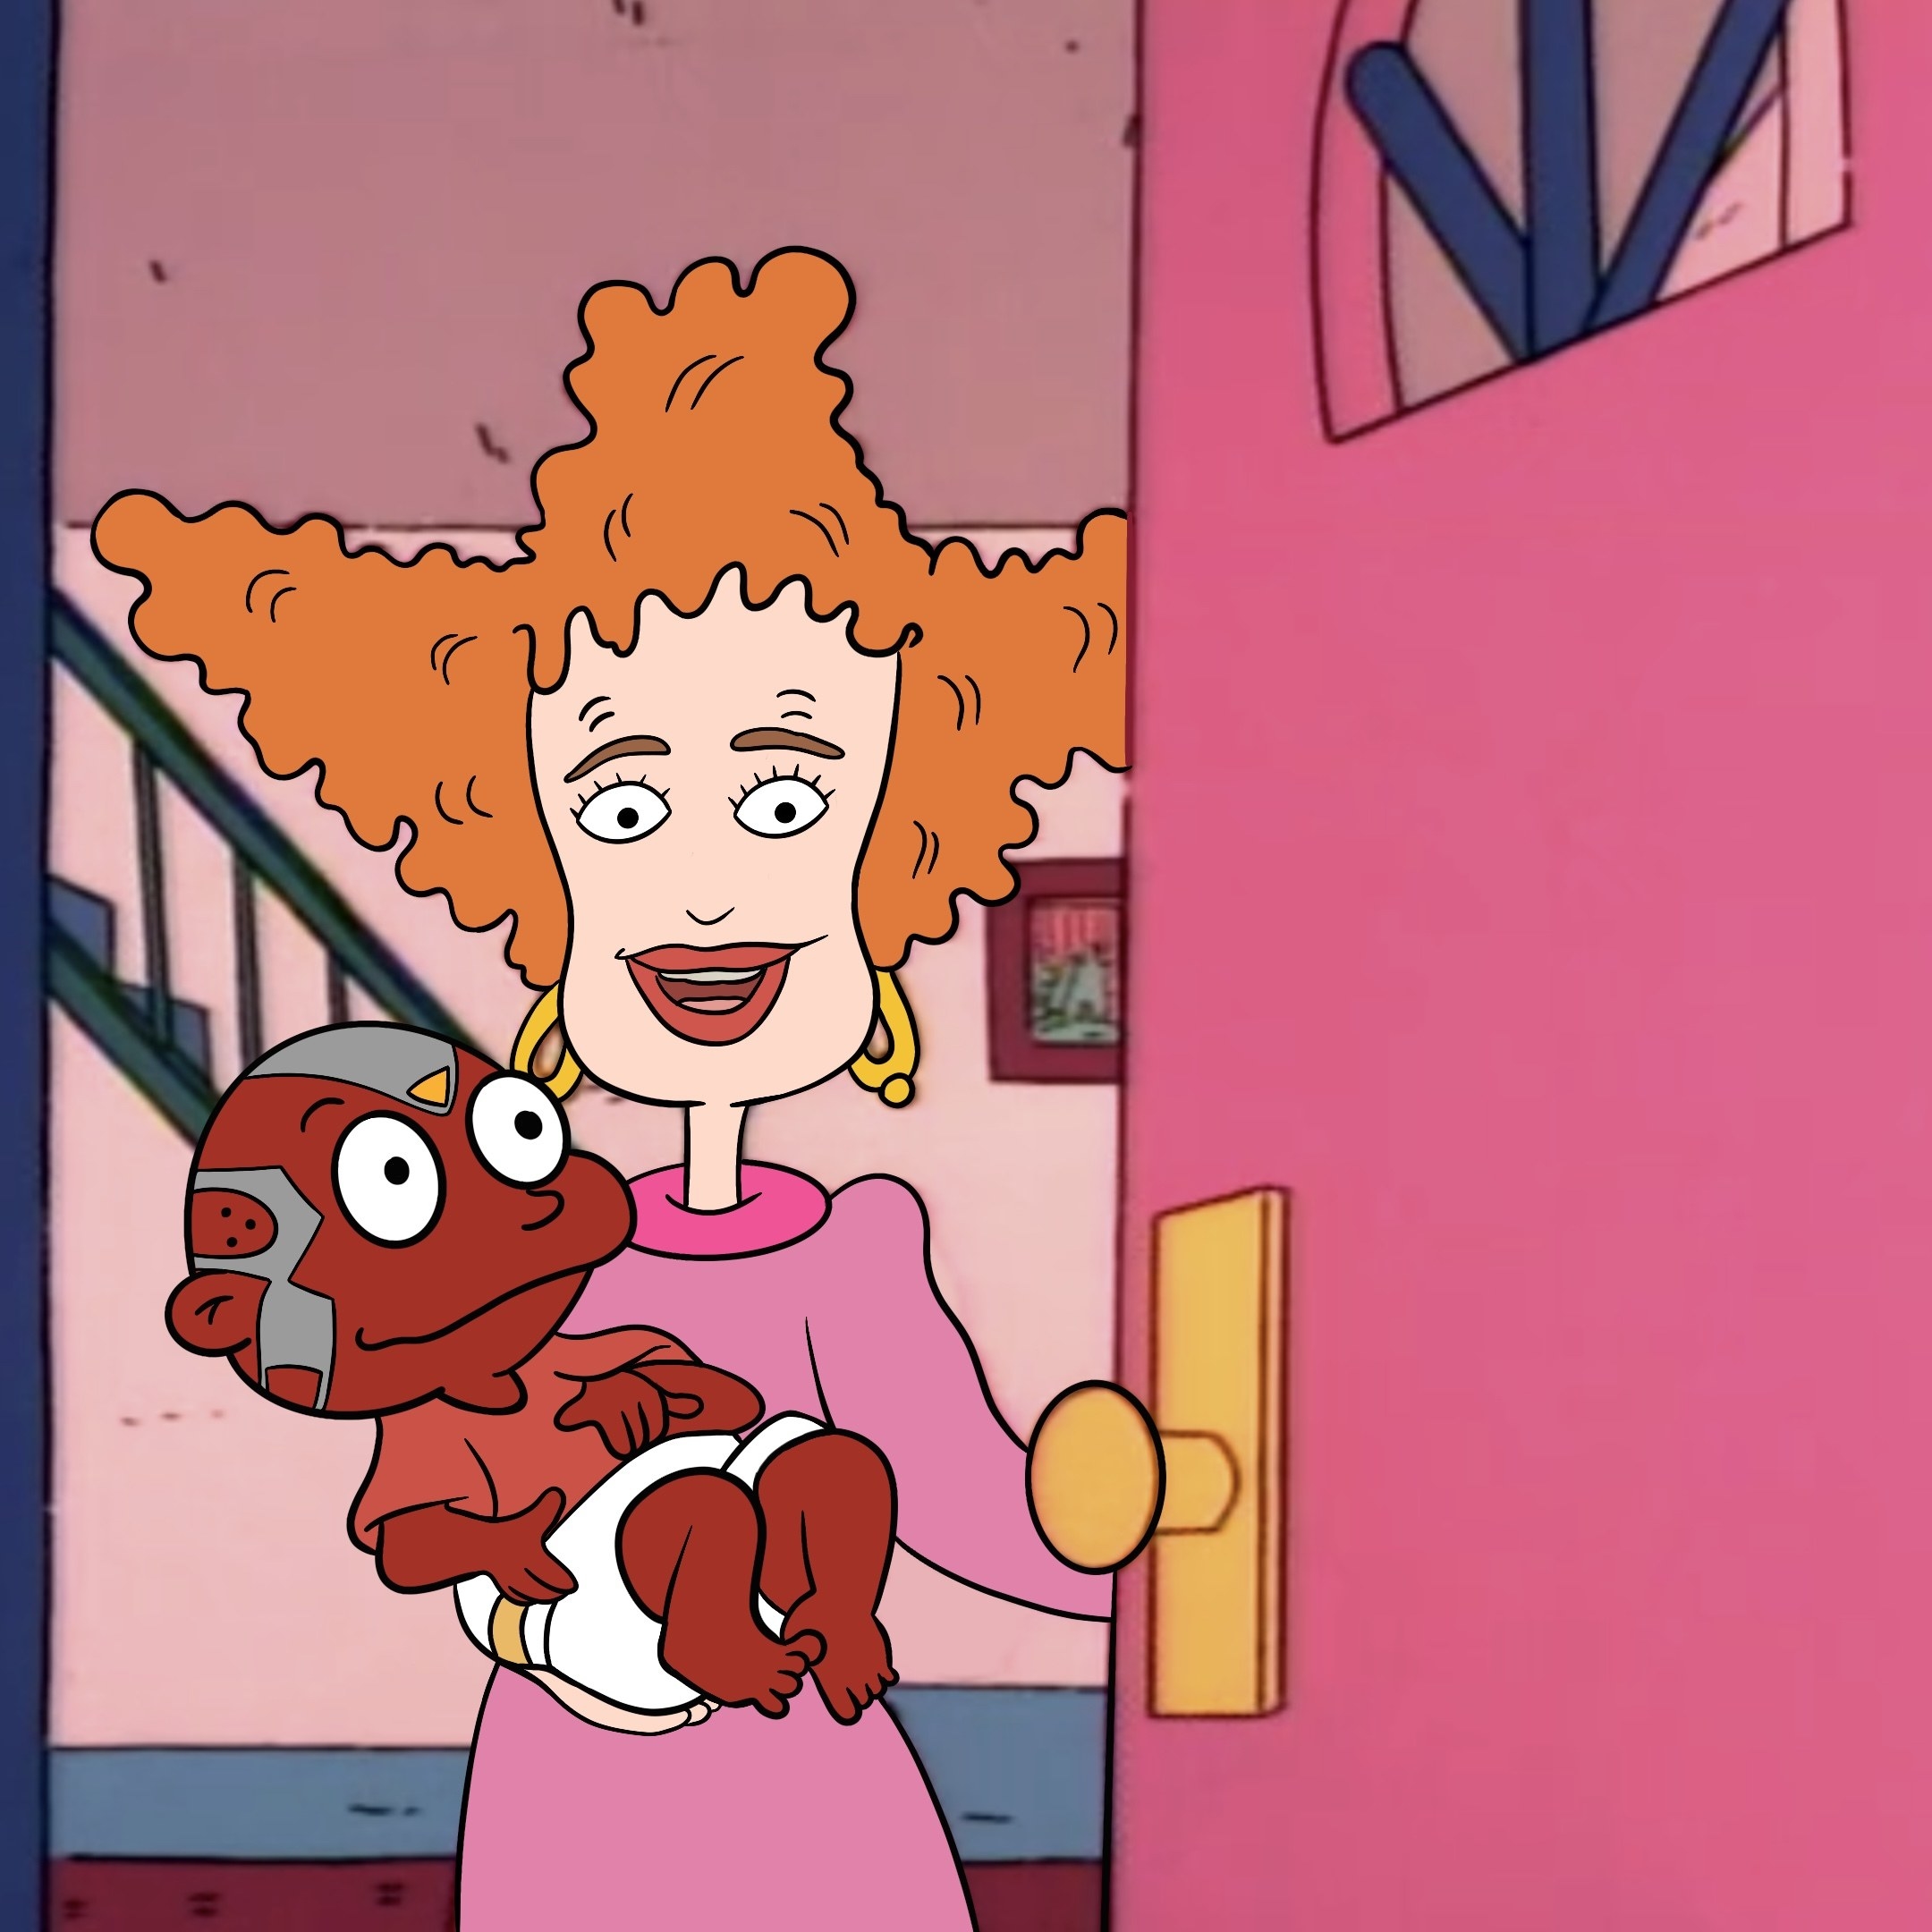 Wanda holds a baby Vision that resembled Tommy Pickles from Rugrats